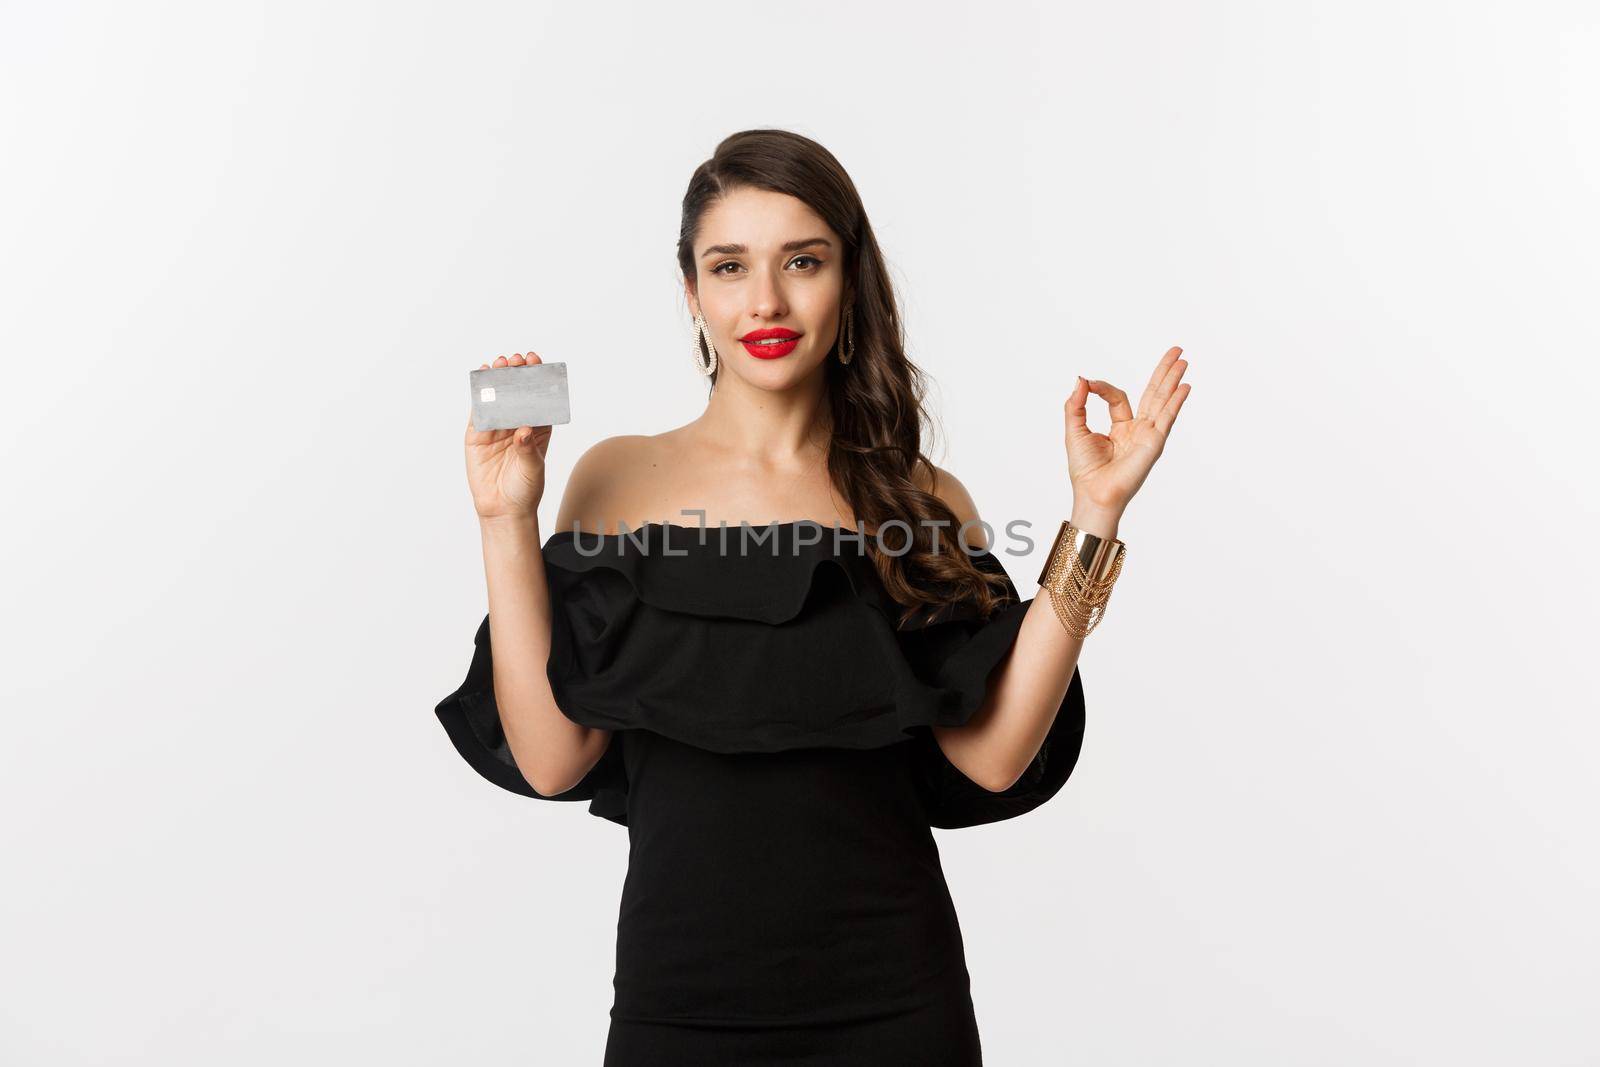 Beauty and shopping concept. Gorgeous woman in luxury jewelry and black dress, showing okay sign and credit card, standing over white background.